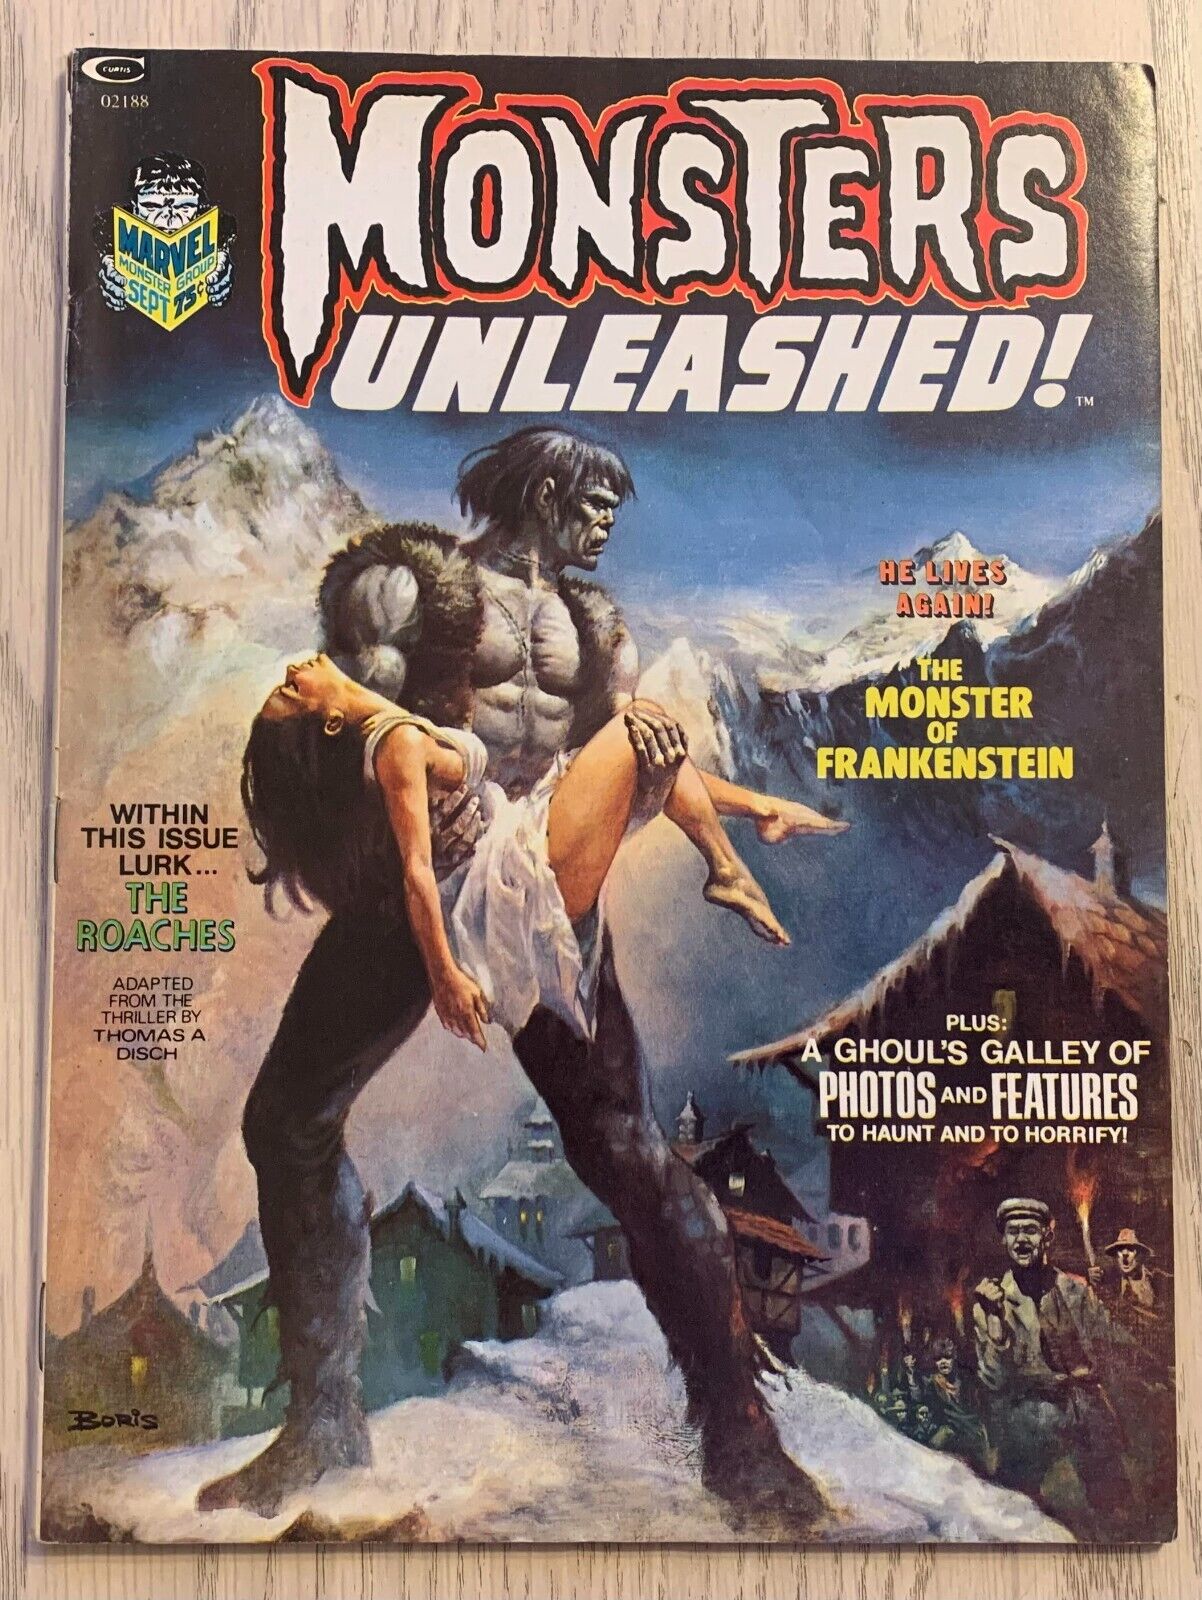 Curtis Comics - Monsters Unleashed #2 - Sep 1973 - Marvel Monster Group